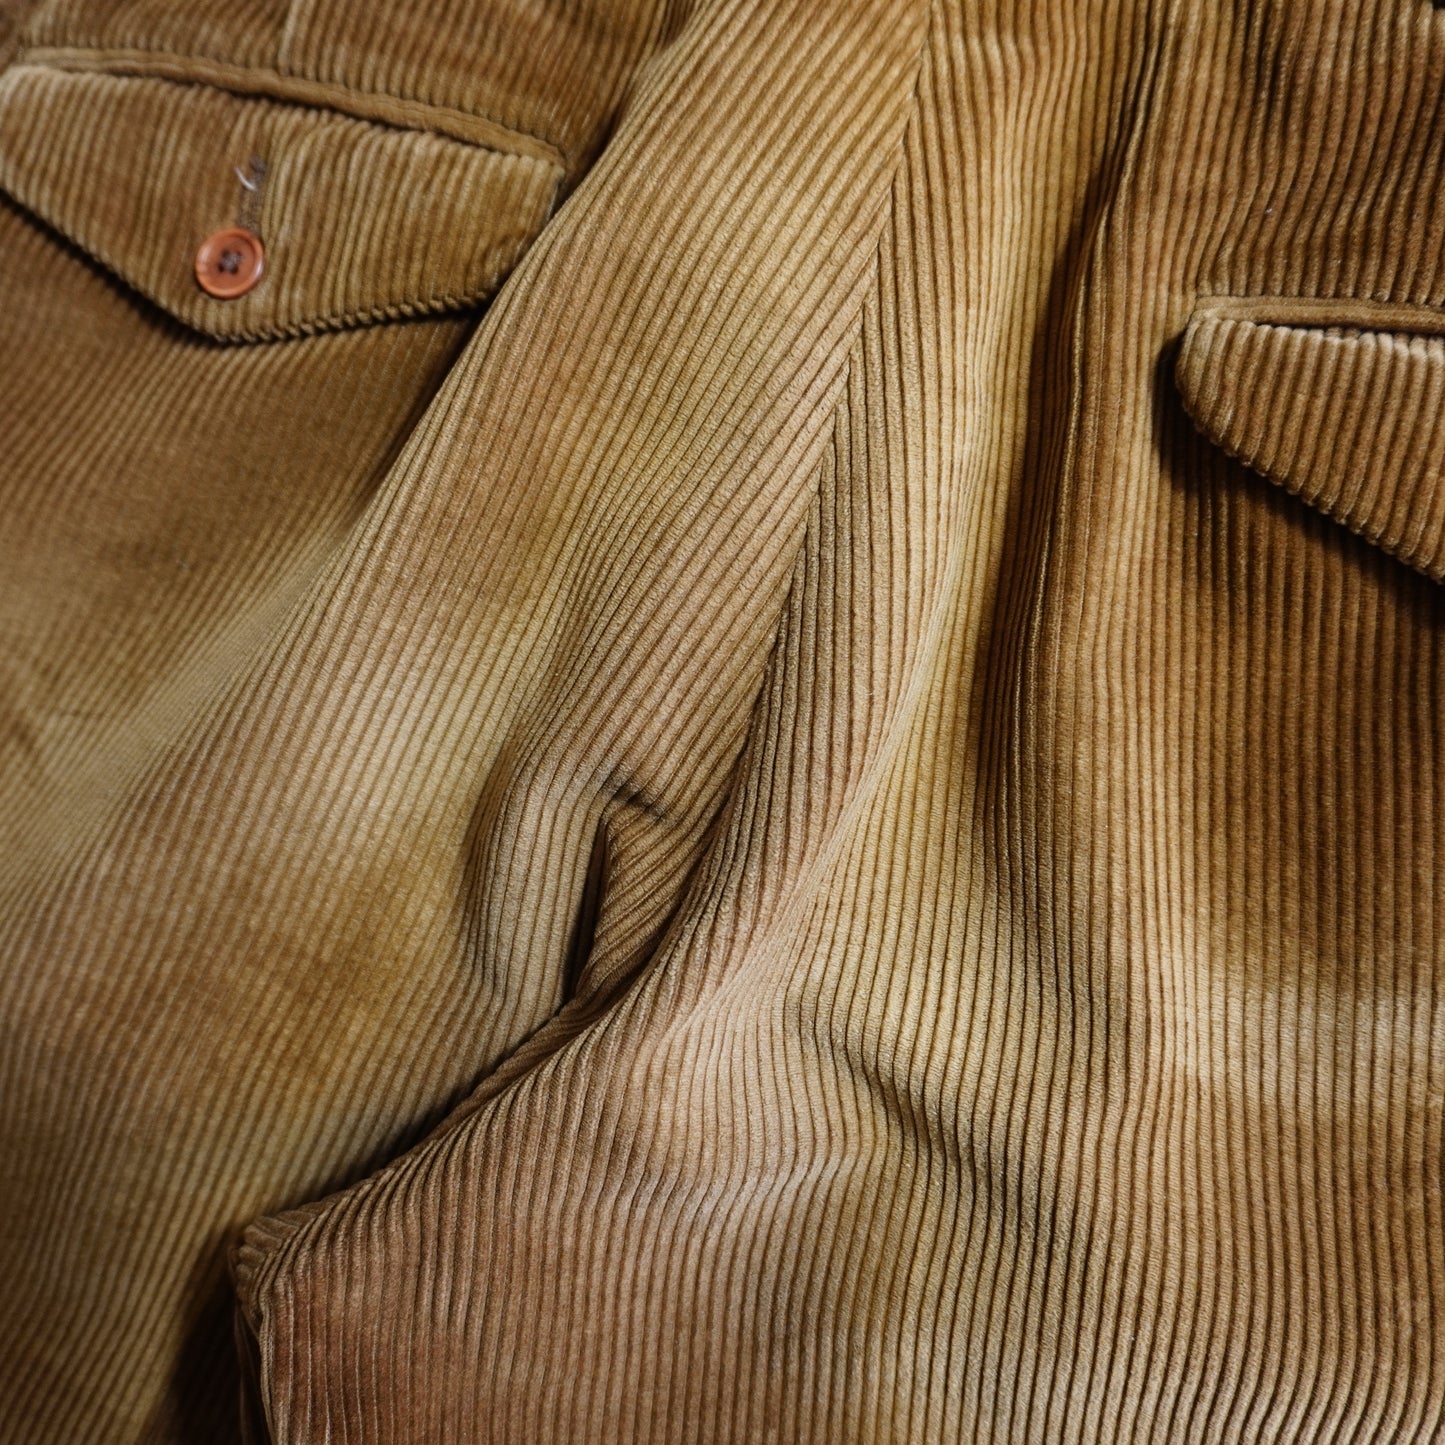 Used 80's L.L.Bean 2Tuck Corduroy Pants MADE IN USA fits like 32inch